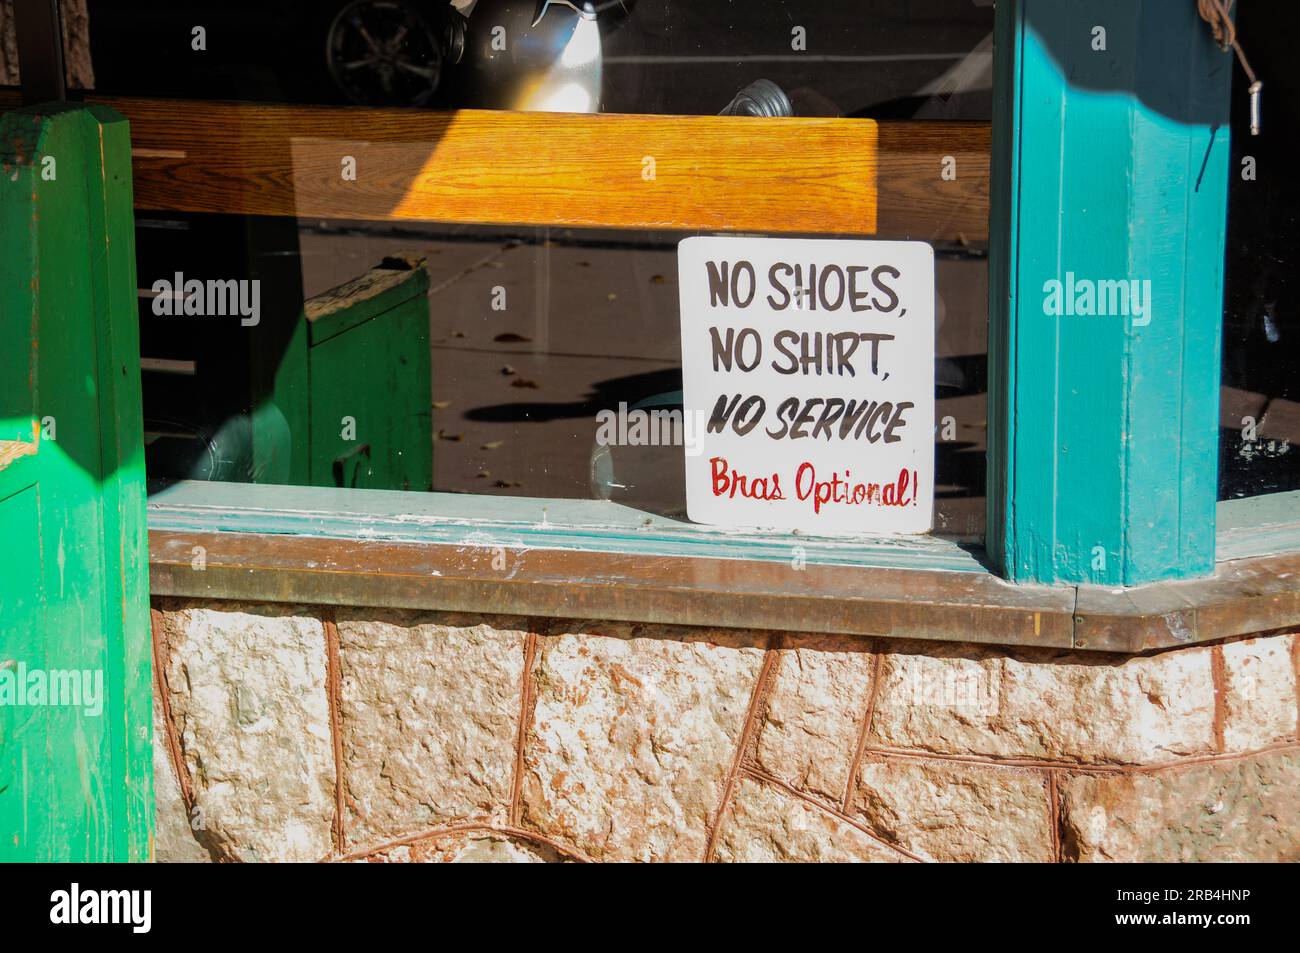 Cheeky 'No Shoes, No Shirt, No Service - Bras Optional!' sign in storefront in Manitou Springs, Colorado Stock Photo